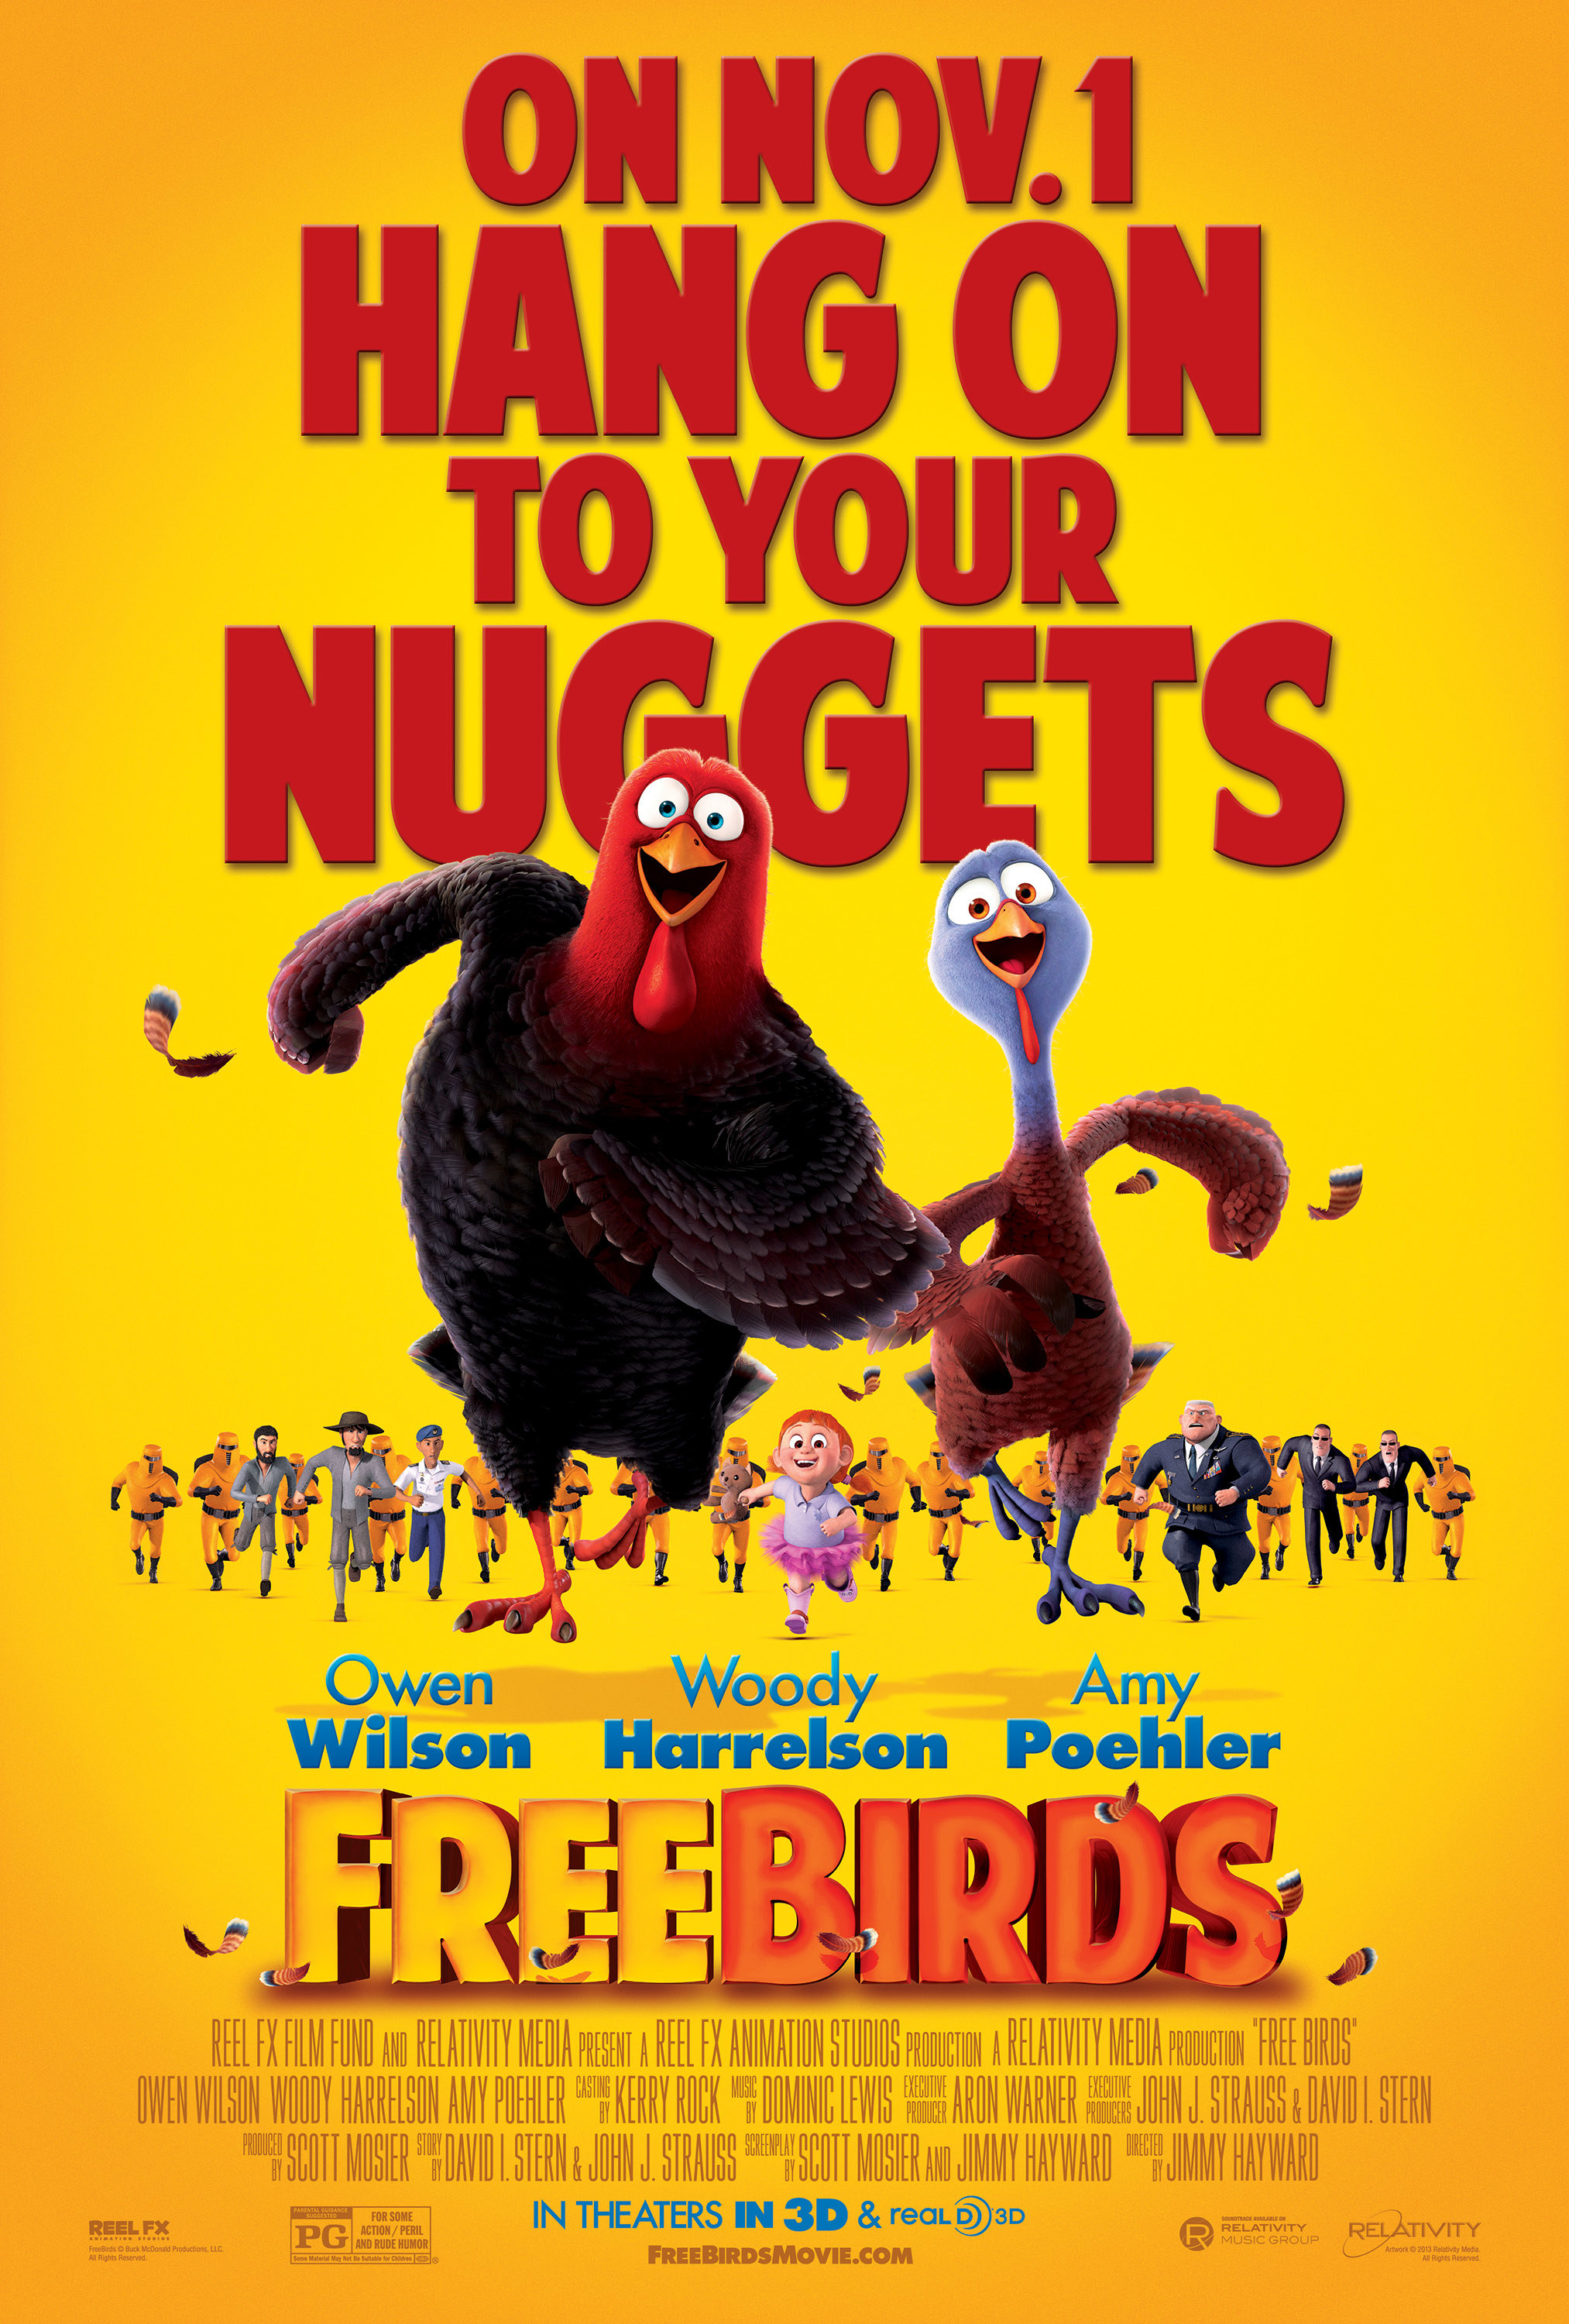 Movie poster for Free Birds; shows animated turkeys with tagline &quot;Hang on to your nuggets&quot;